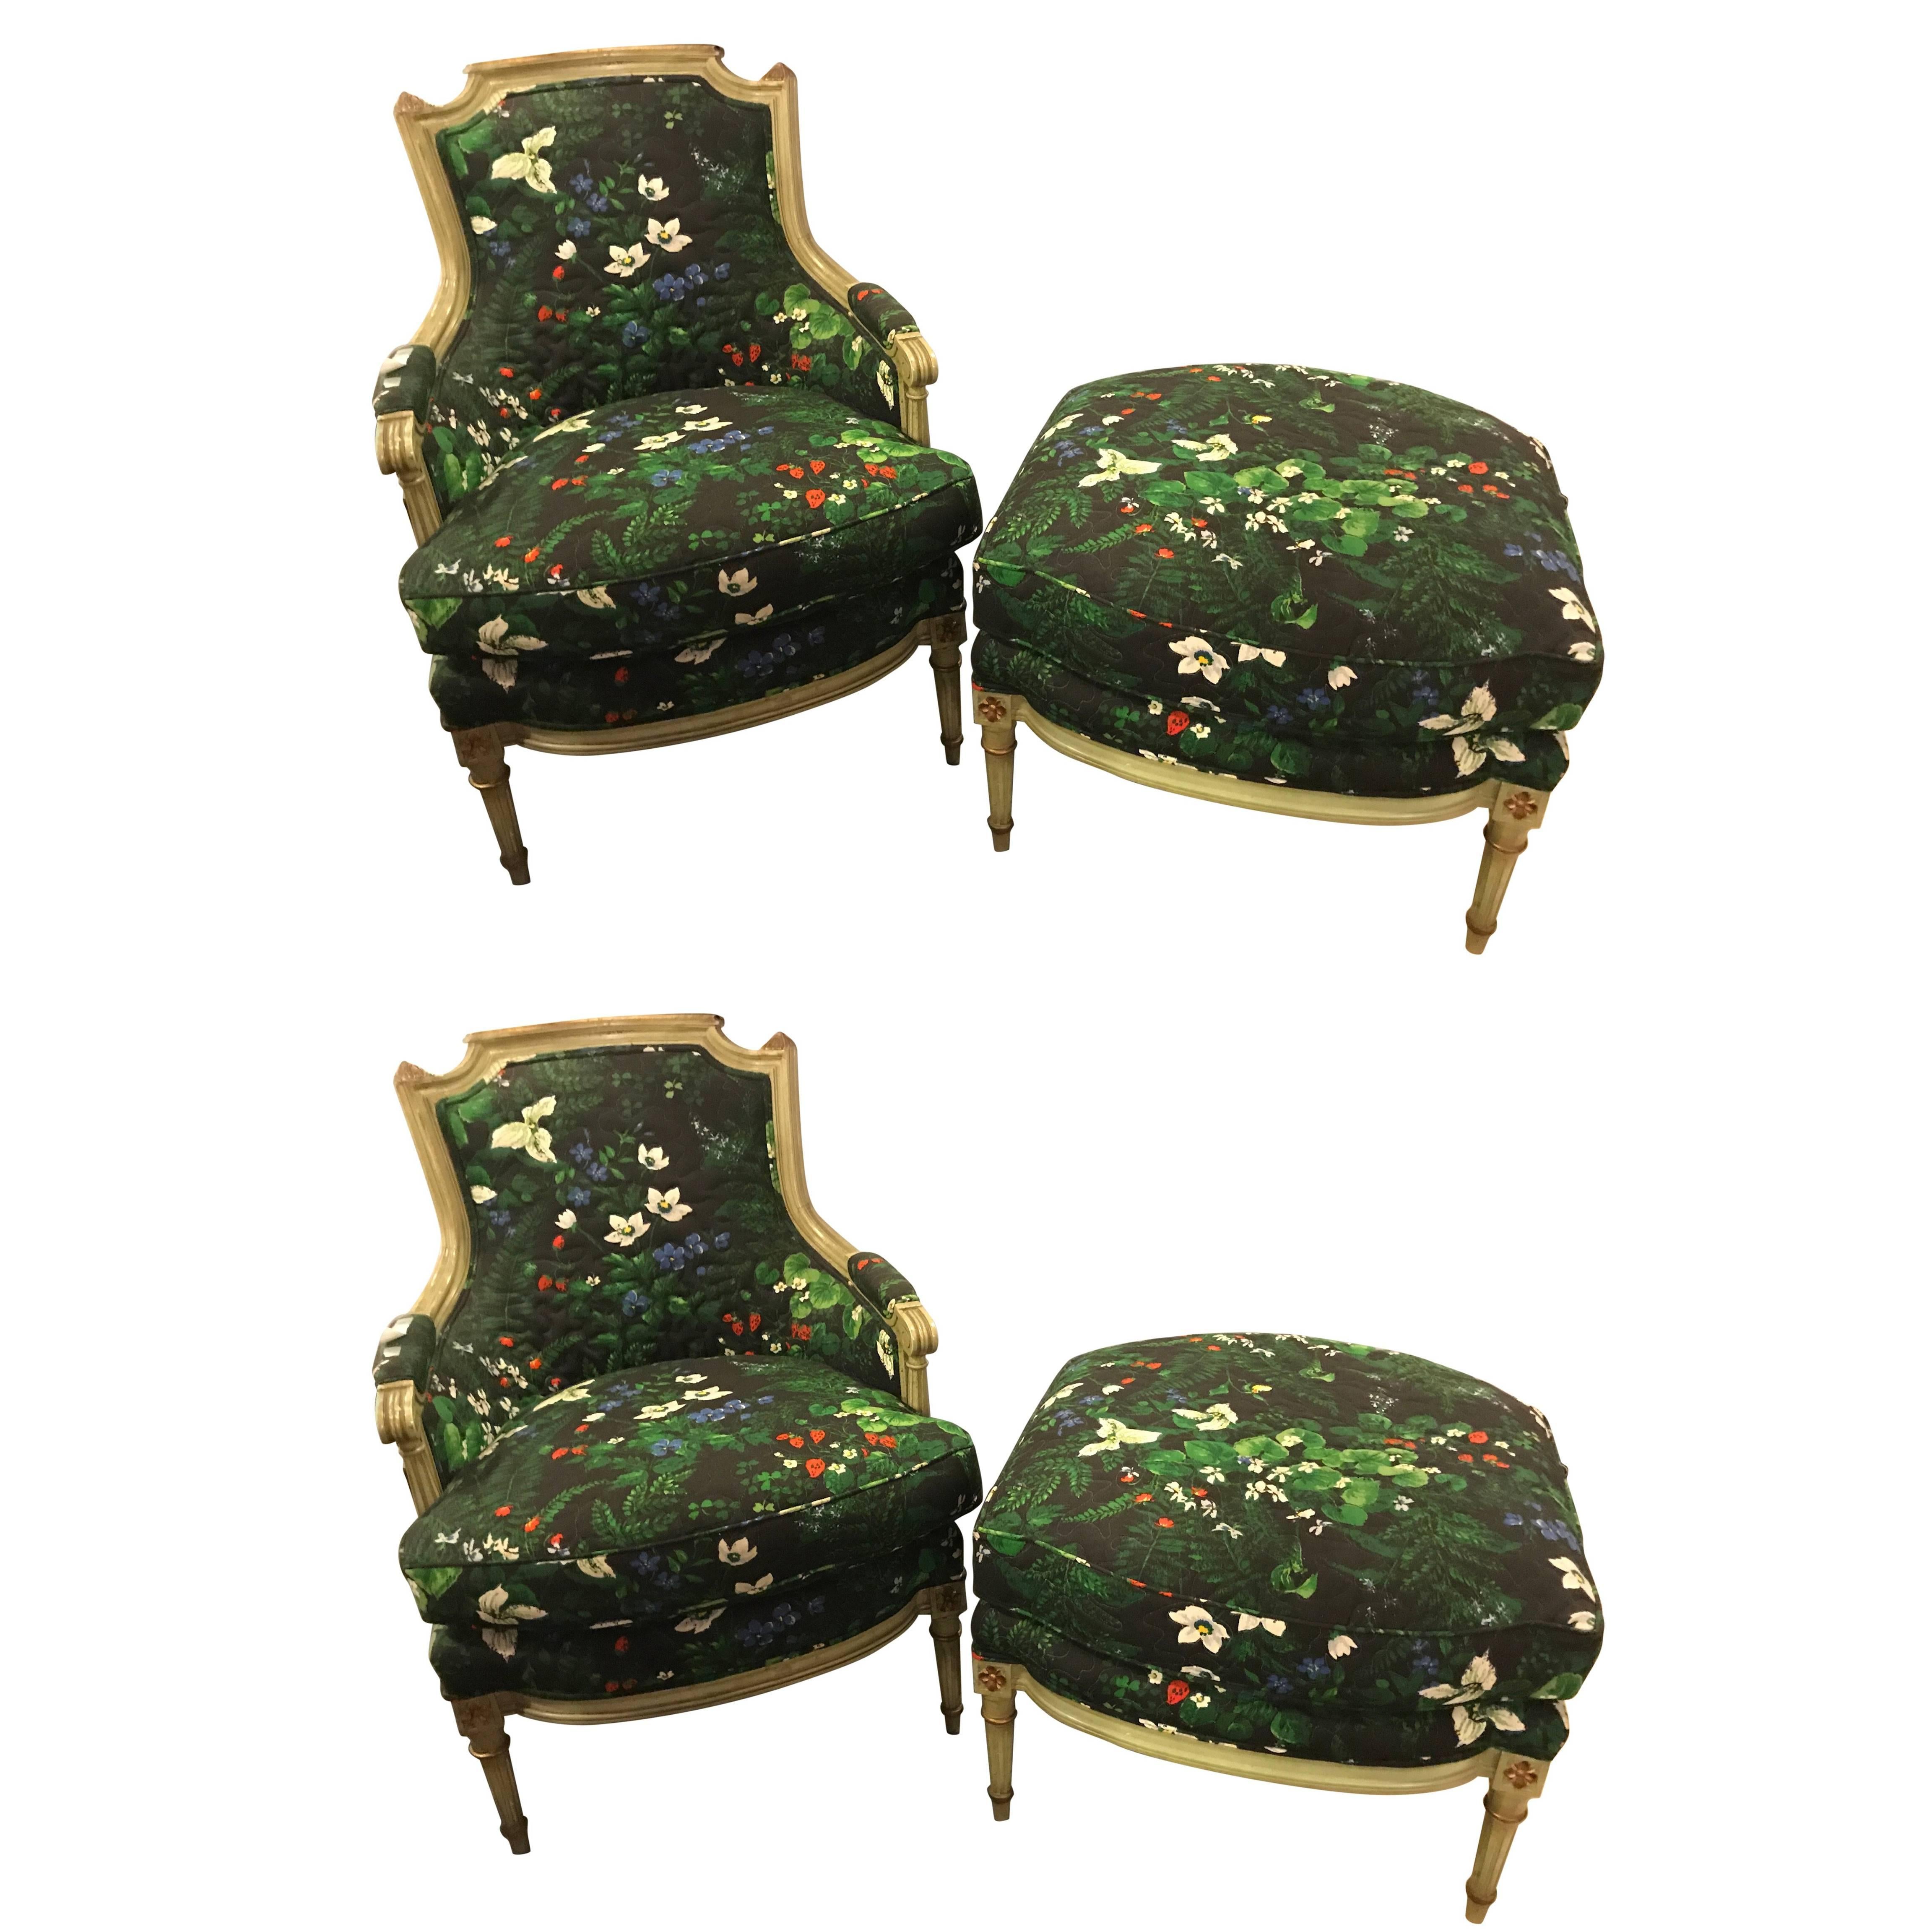 Pair of Louis XVI Style Bergere Chairs and Matching Ottomans by Jansen